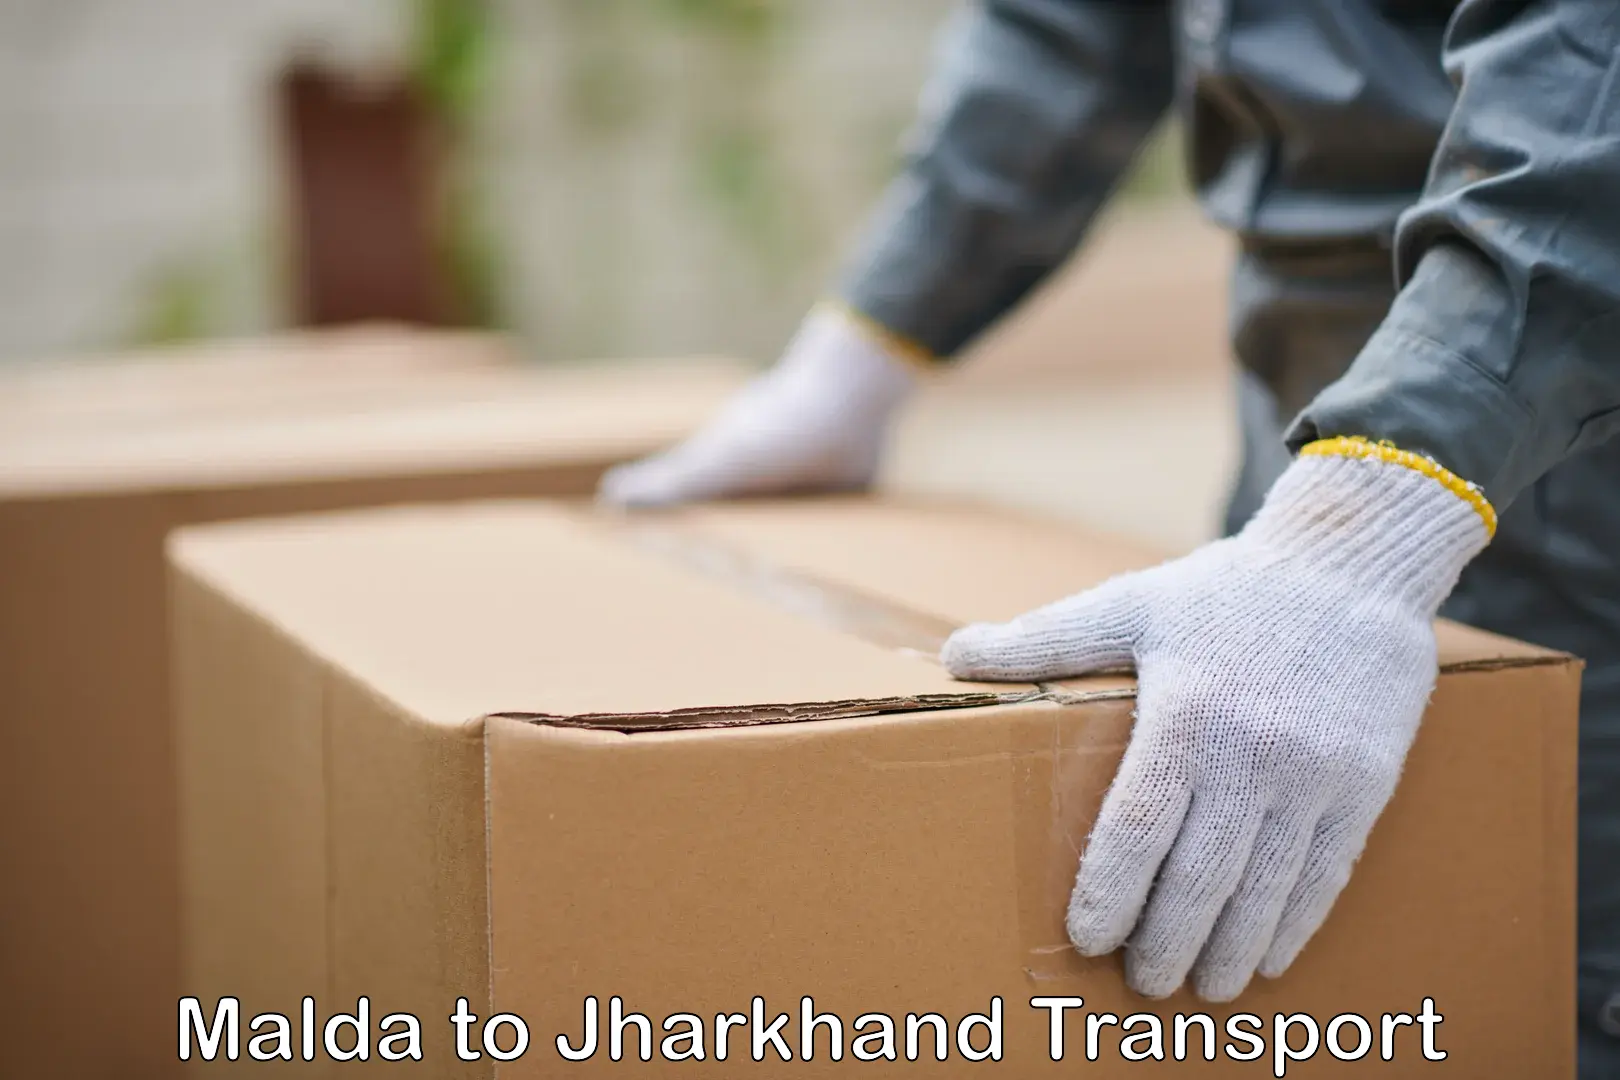 Pick up transport service in Malda to Jharkhand